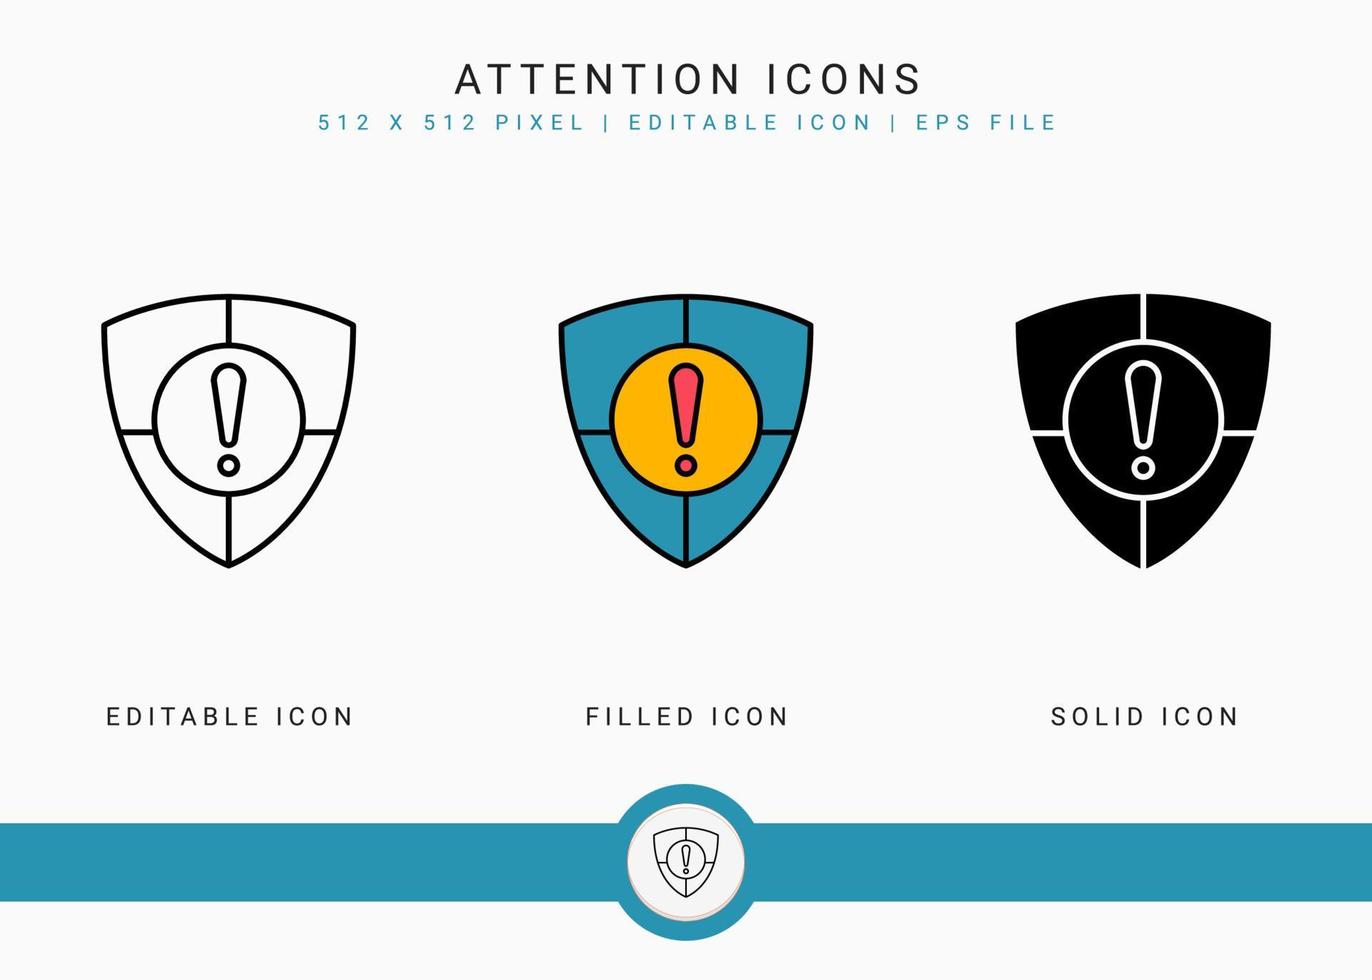 Attention icons set vector illustration with solid icon line style. Exclamation mark alert concept. Editable stroke icon on isolated background for web design, user interface, and mobile application